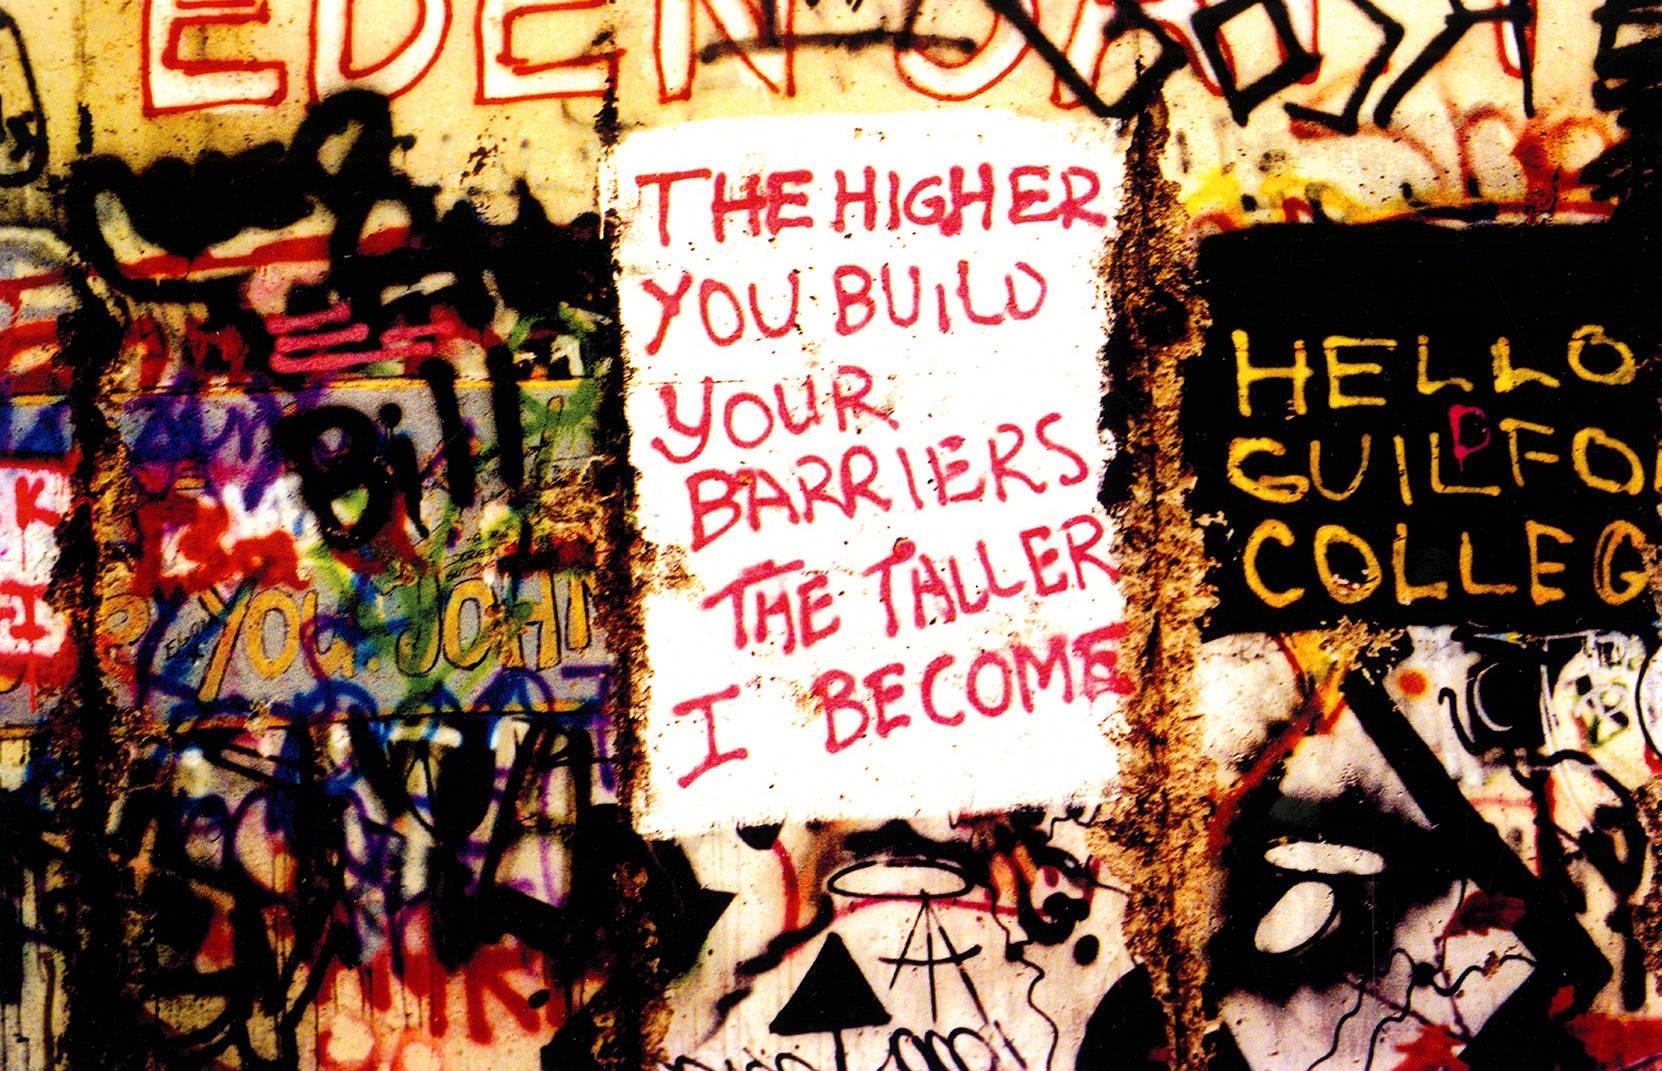 "The higher you build your barriers the taller I become"
The Berlin Wall, 1989 by legendary photo journalist, Leni Sinclair - a Kresge Foundation Eminent Artist (see The Guardian UK, Jan. 28, 2016) & legendary documenterian of 60's counter-cultural